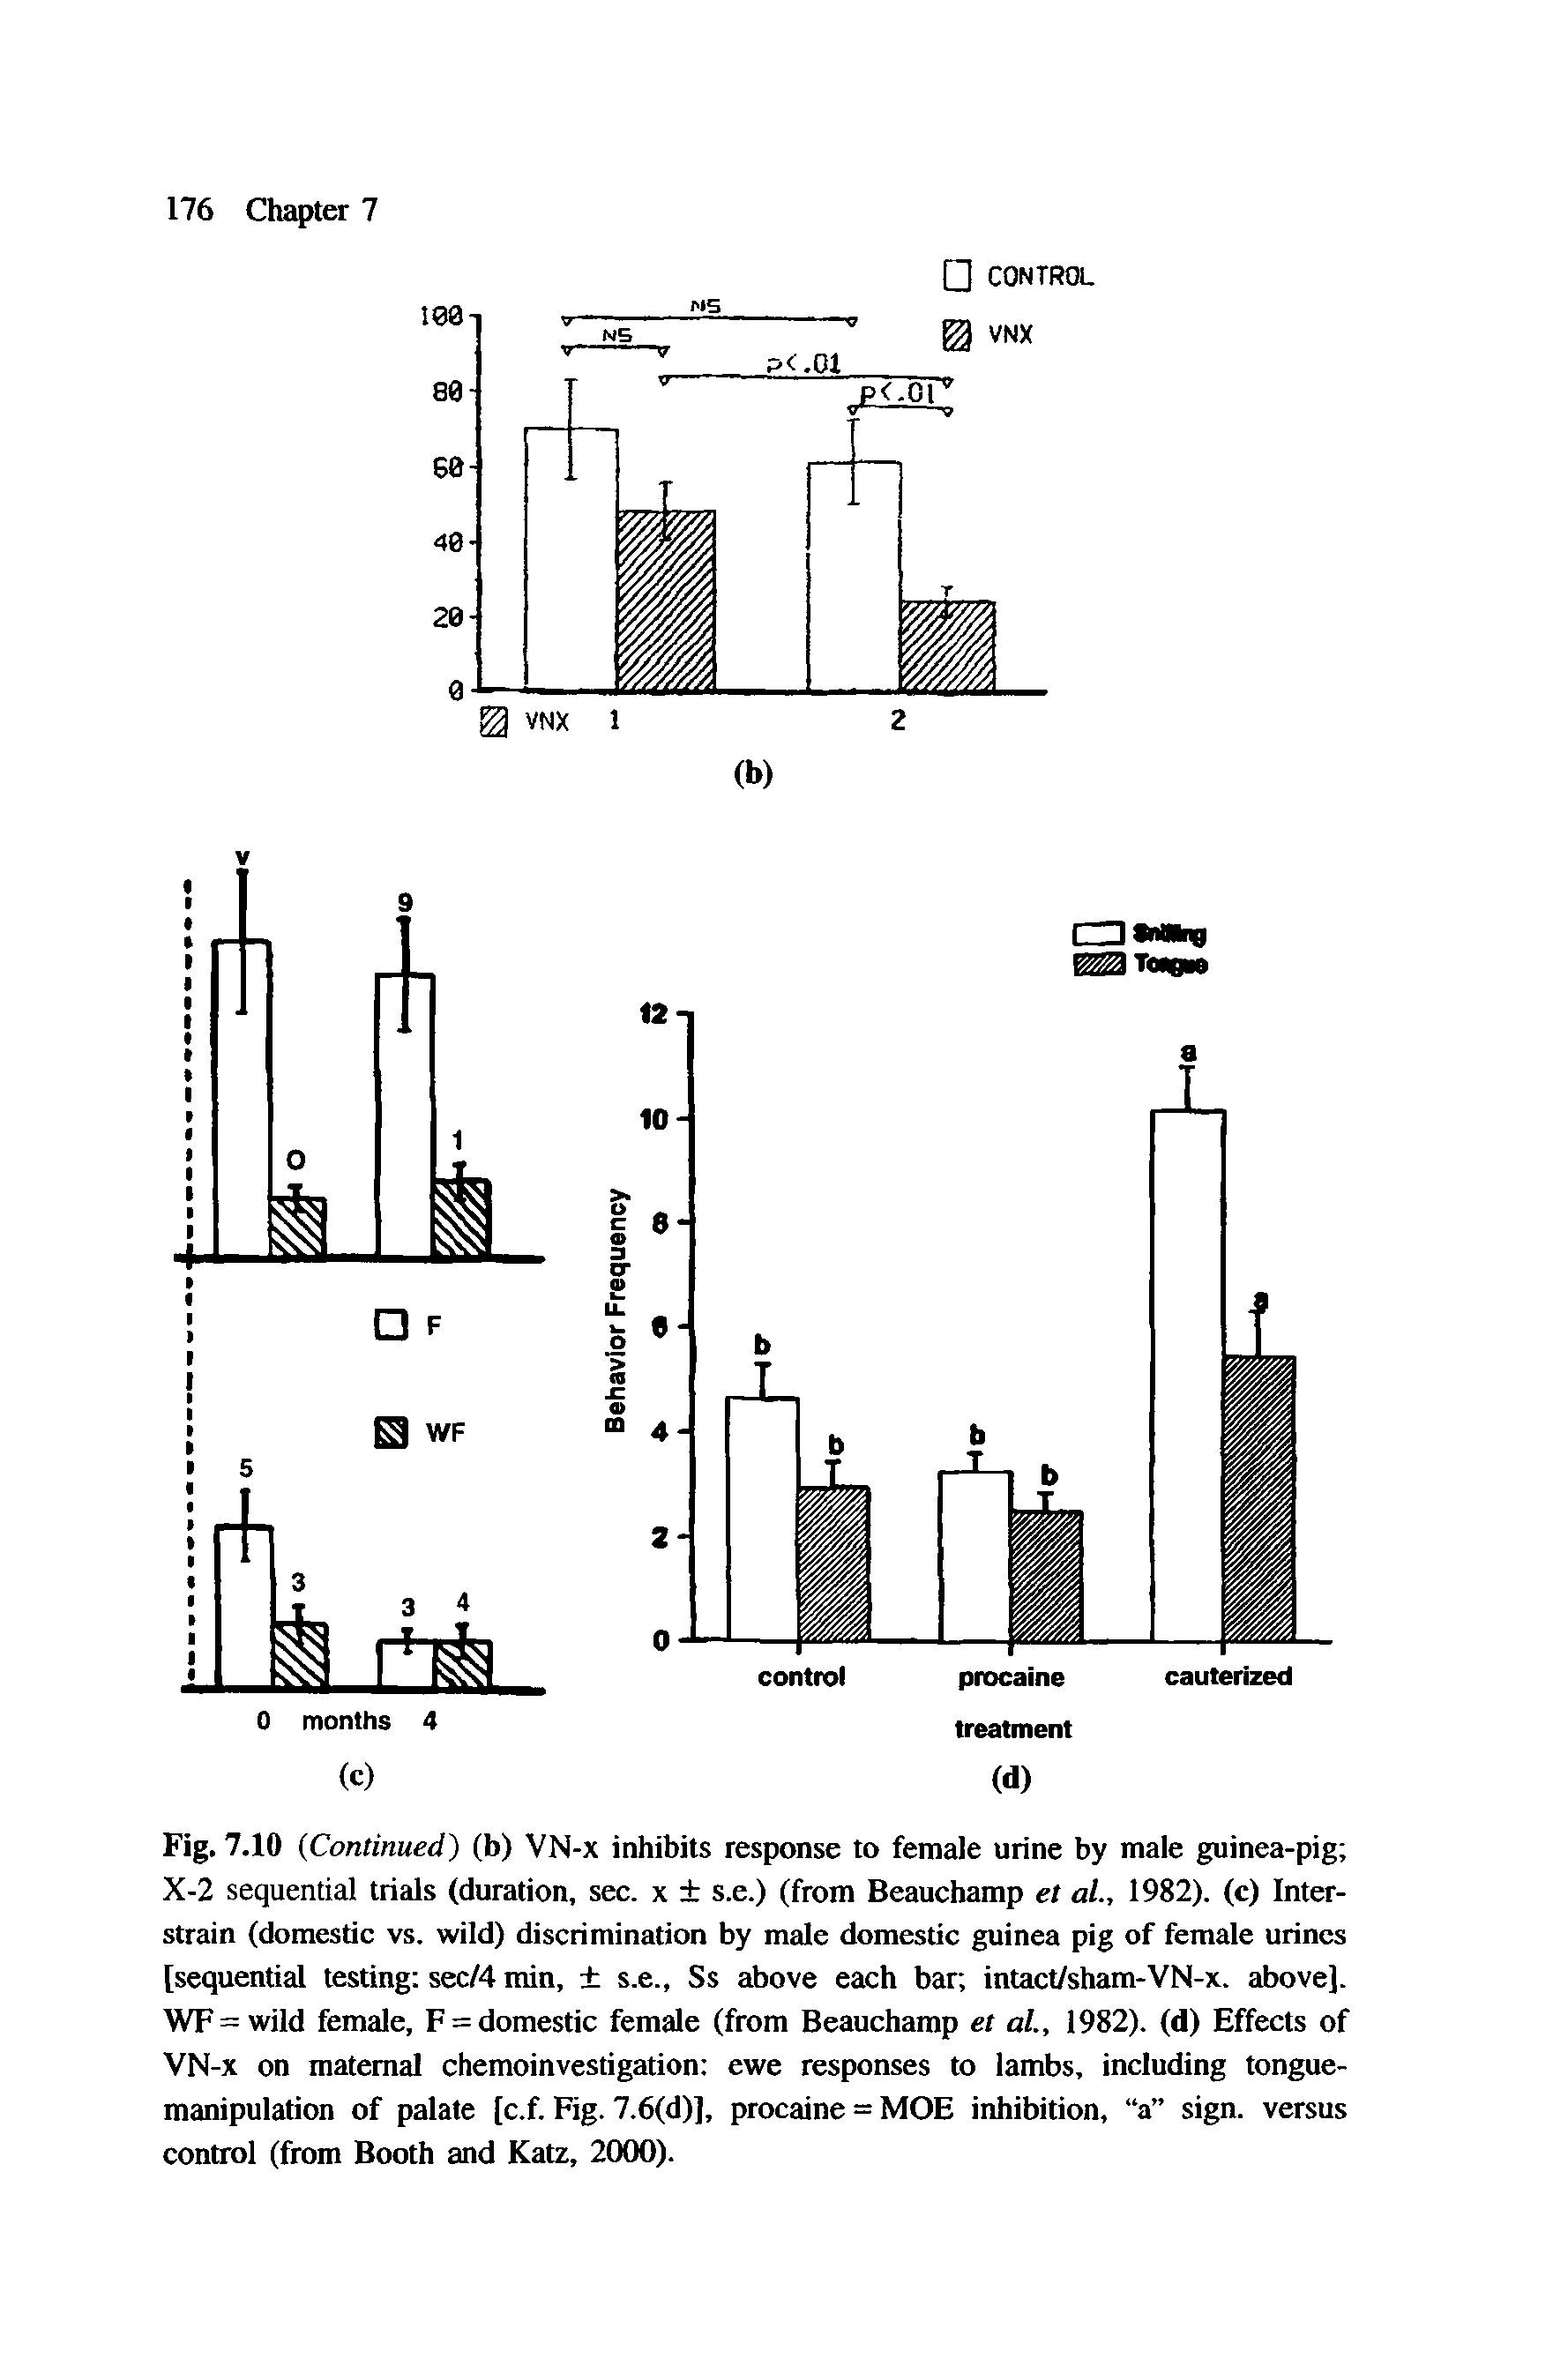 Fig. 7.10 (Continued) (b) VN-x inhibits response to female urine by male guinea-pig X-2 sequential trials (duration, sec. x s.e.) (from Beauchamp et al., 1982). (c) Inter-strain (domestic vs. wild) discrimination by male domestic guinea pig of female urines [sequential testing sec/4 min, s.e., Ss above each bar intact/sham-VN-x. above]. WF= wild female, F = domestic female (from Beauchamp et al., 1982). (d) Effects of VN-x on maternal chemoinvestigation ewe responses to lambs, including tongue-manipulation of palate [c.f. Fig. 7.6(d)], procaine = MOE inhibition, a sign, versus control (from Booth and Katz, 2000).